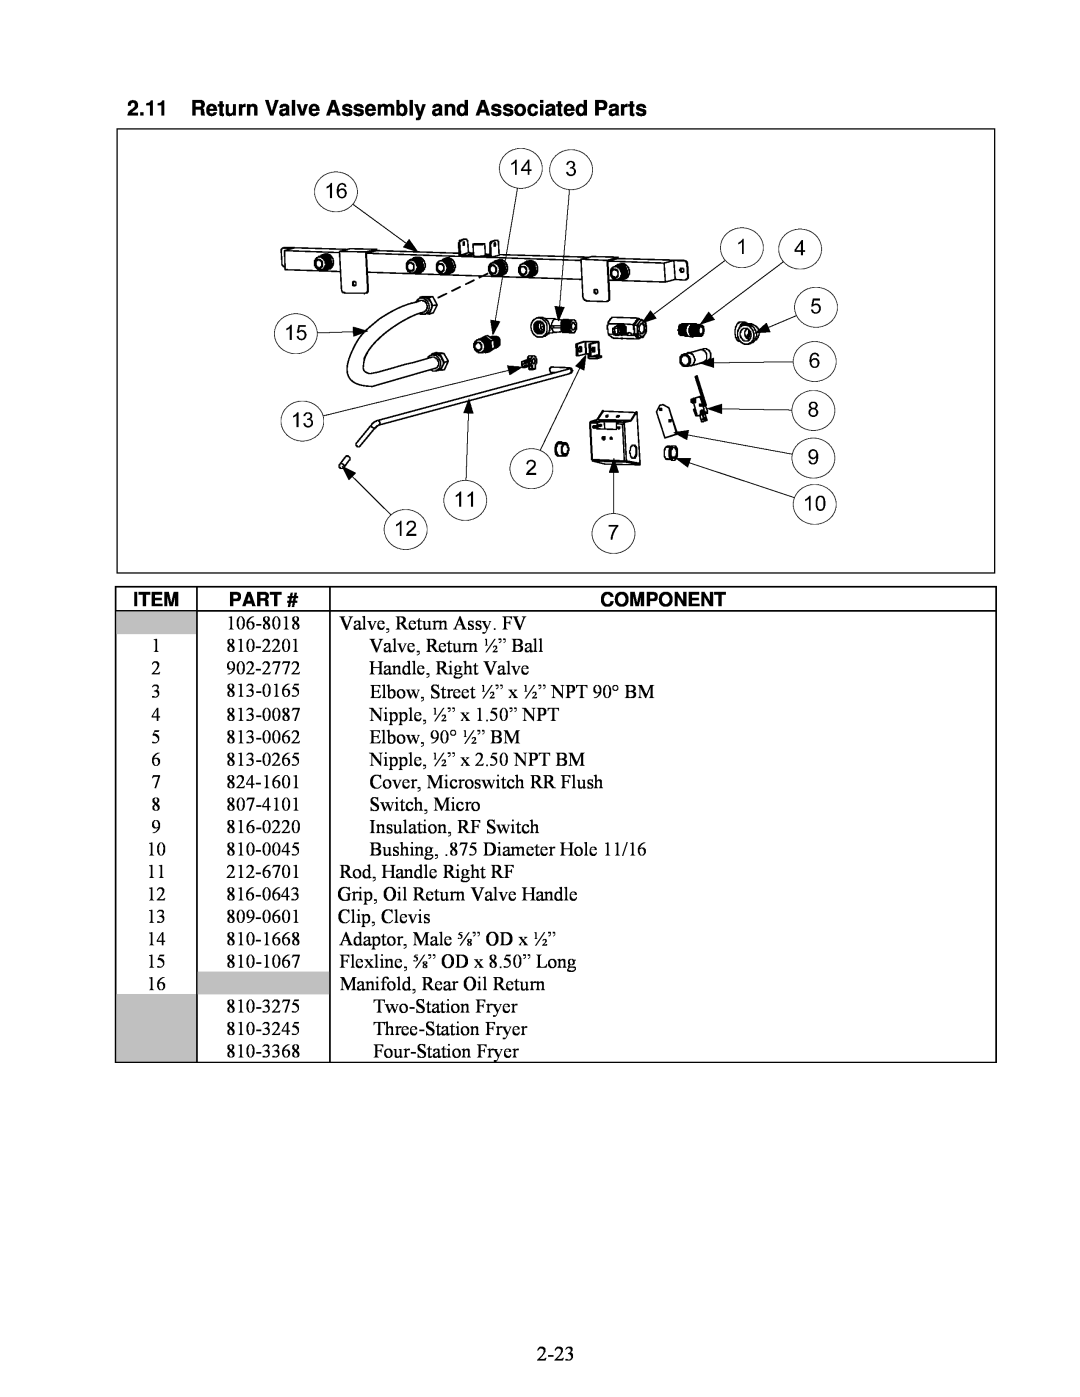 Frymaster 8196345 manual 2.11Return Valve Assembly and Associated Parts 